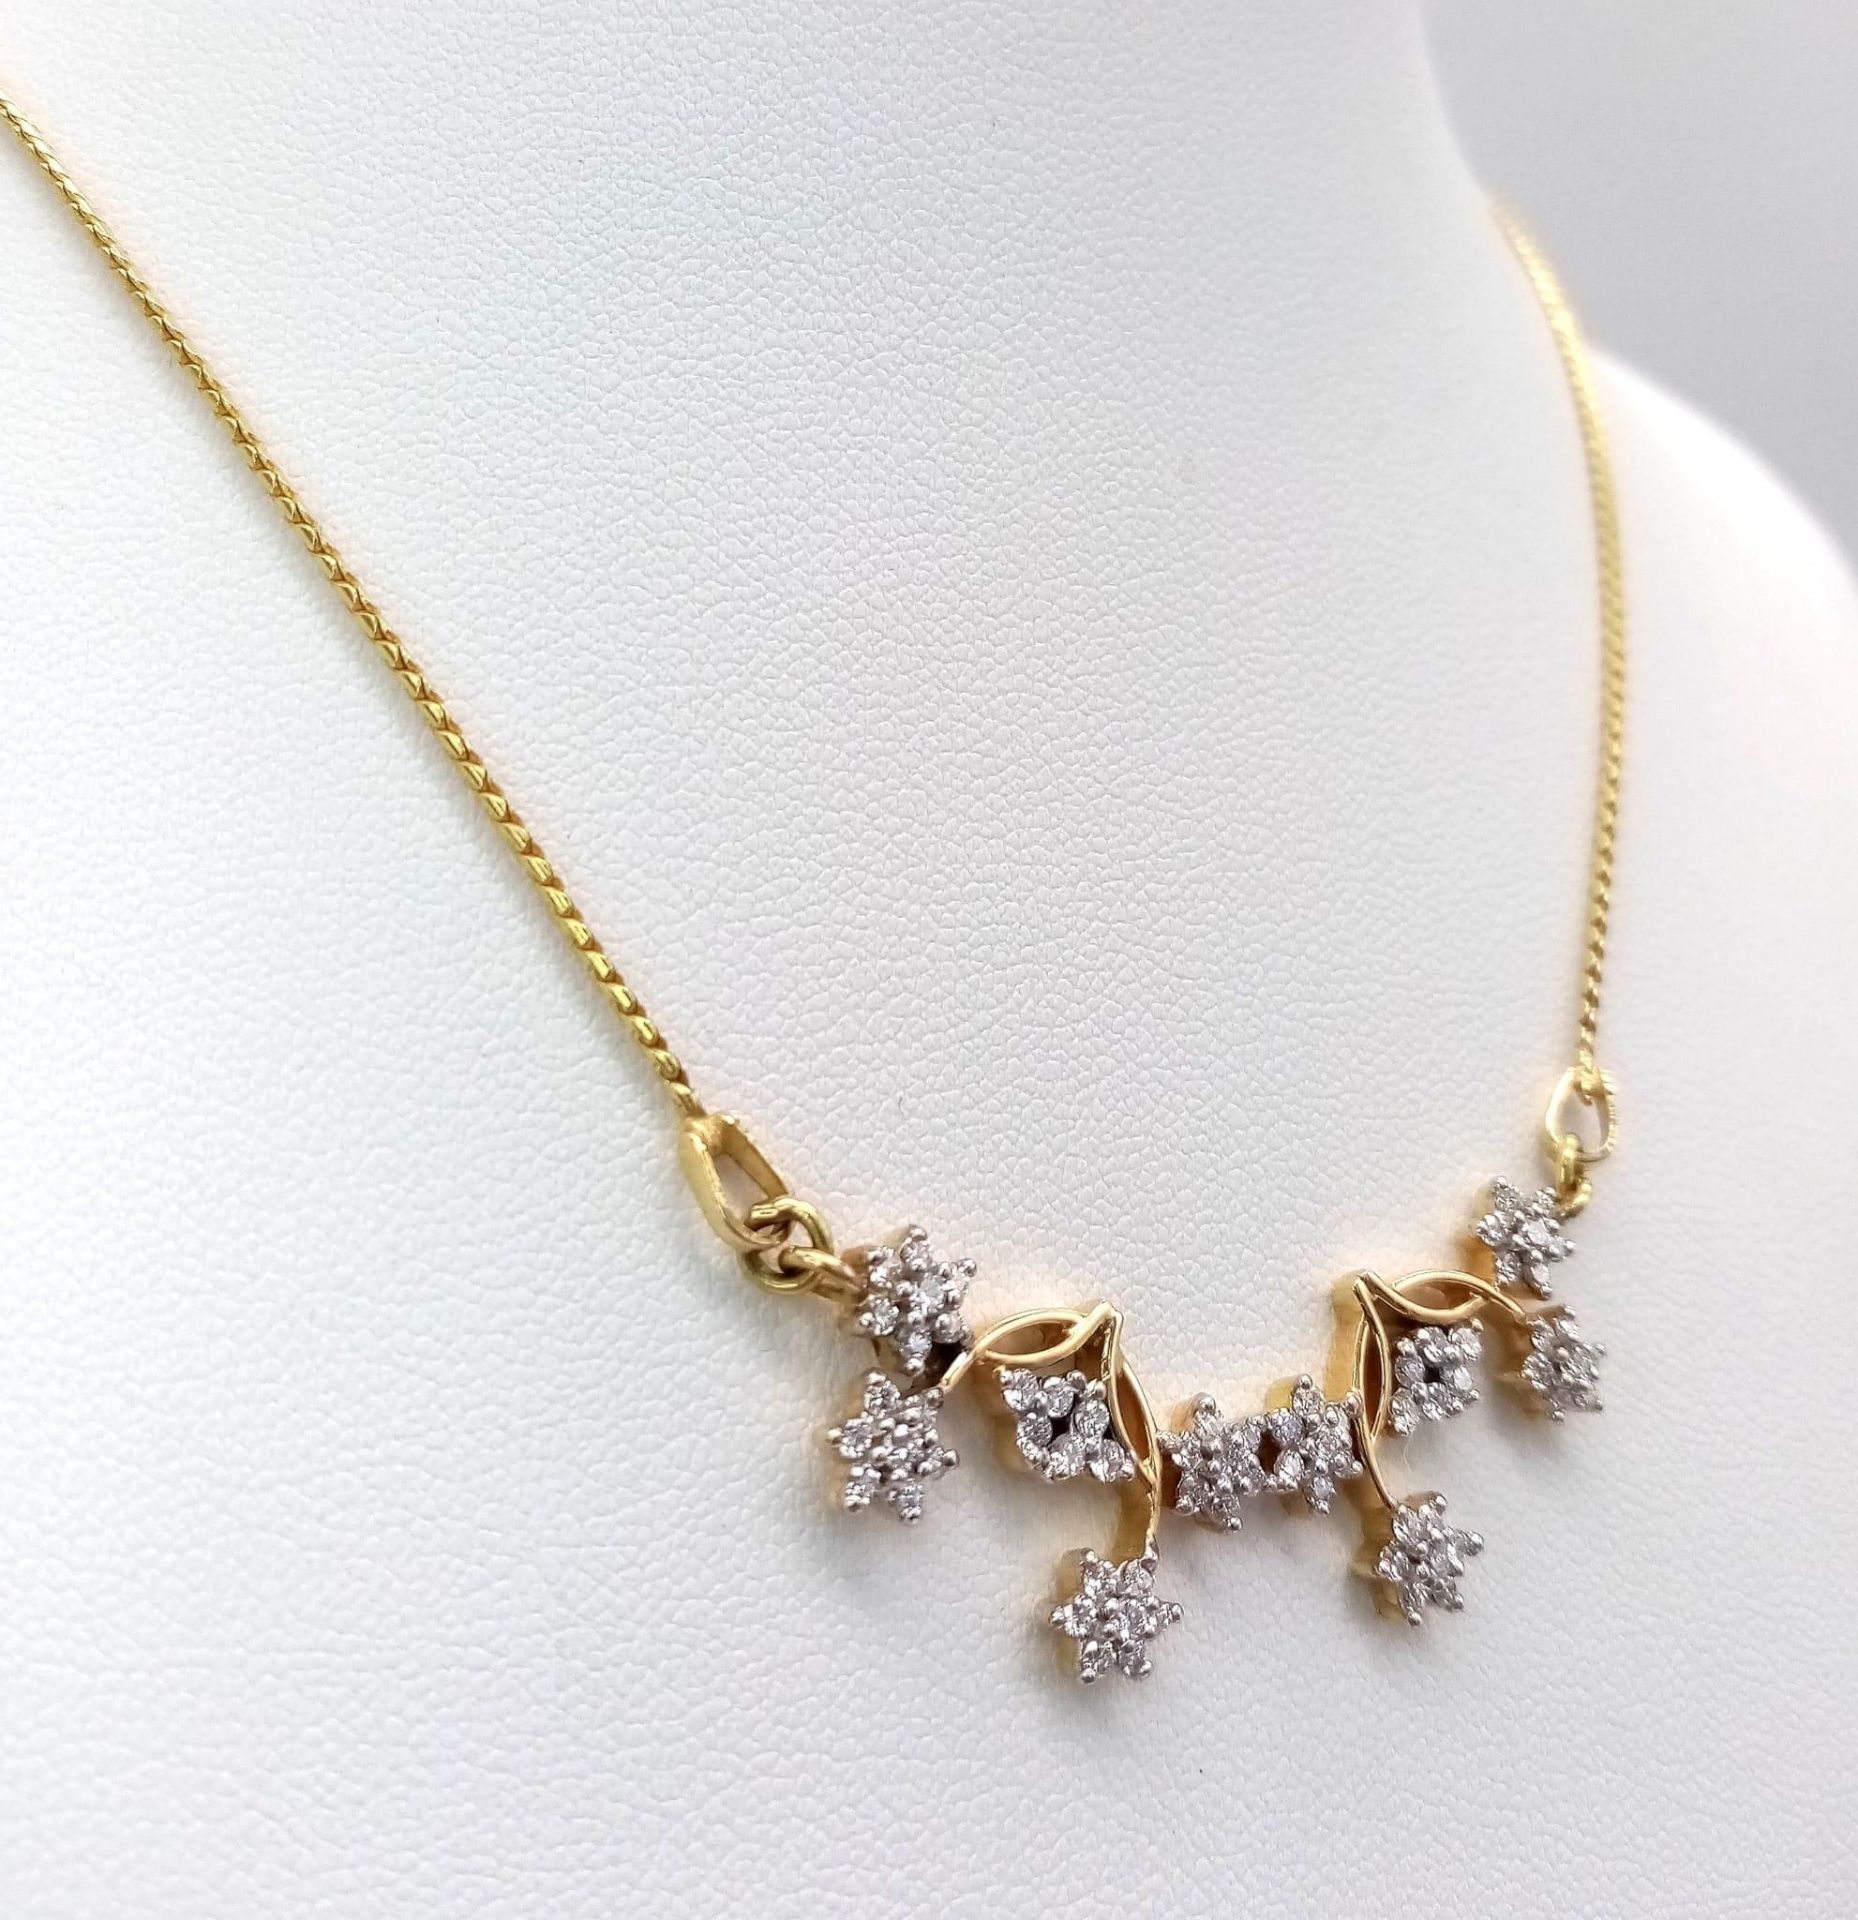 An elegant 18 K yellow gold necklace with with a flower design loaded with diamonds (0.70 carats), - Image 3 of 4